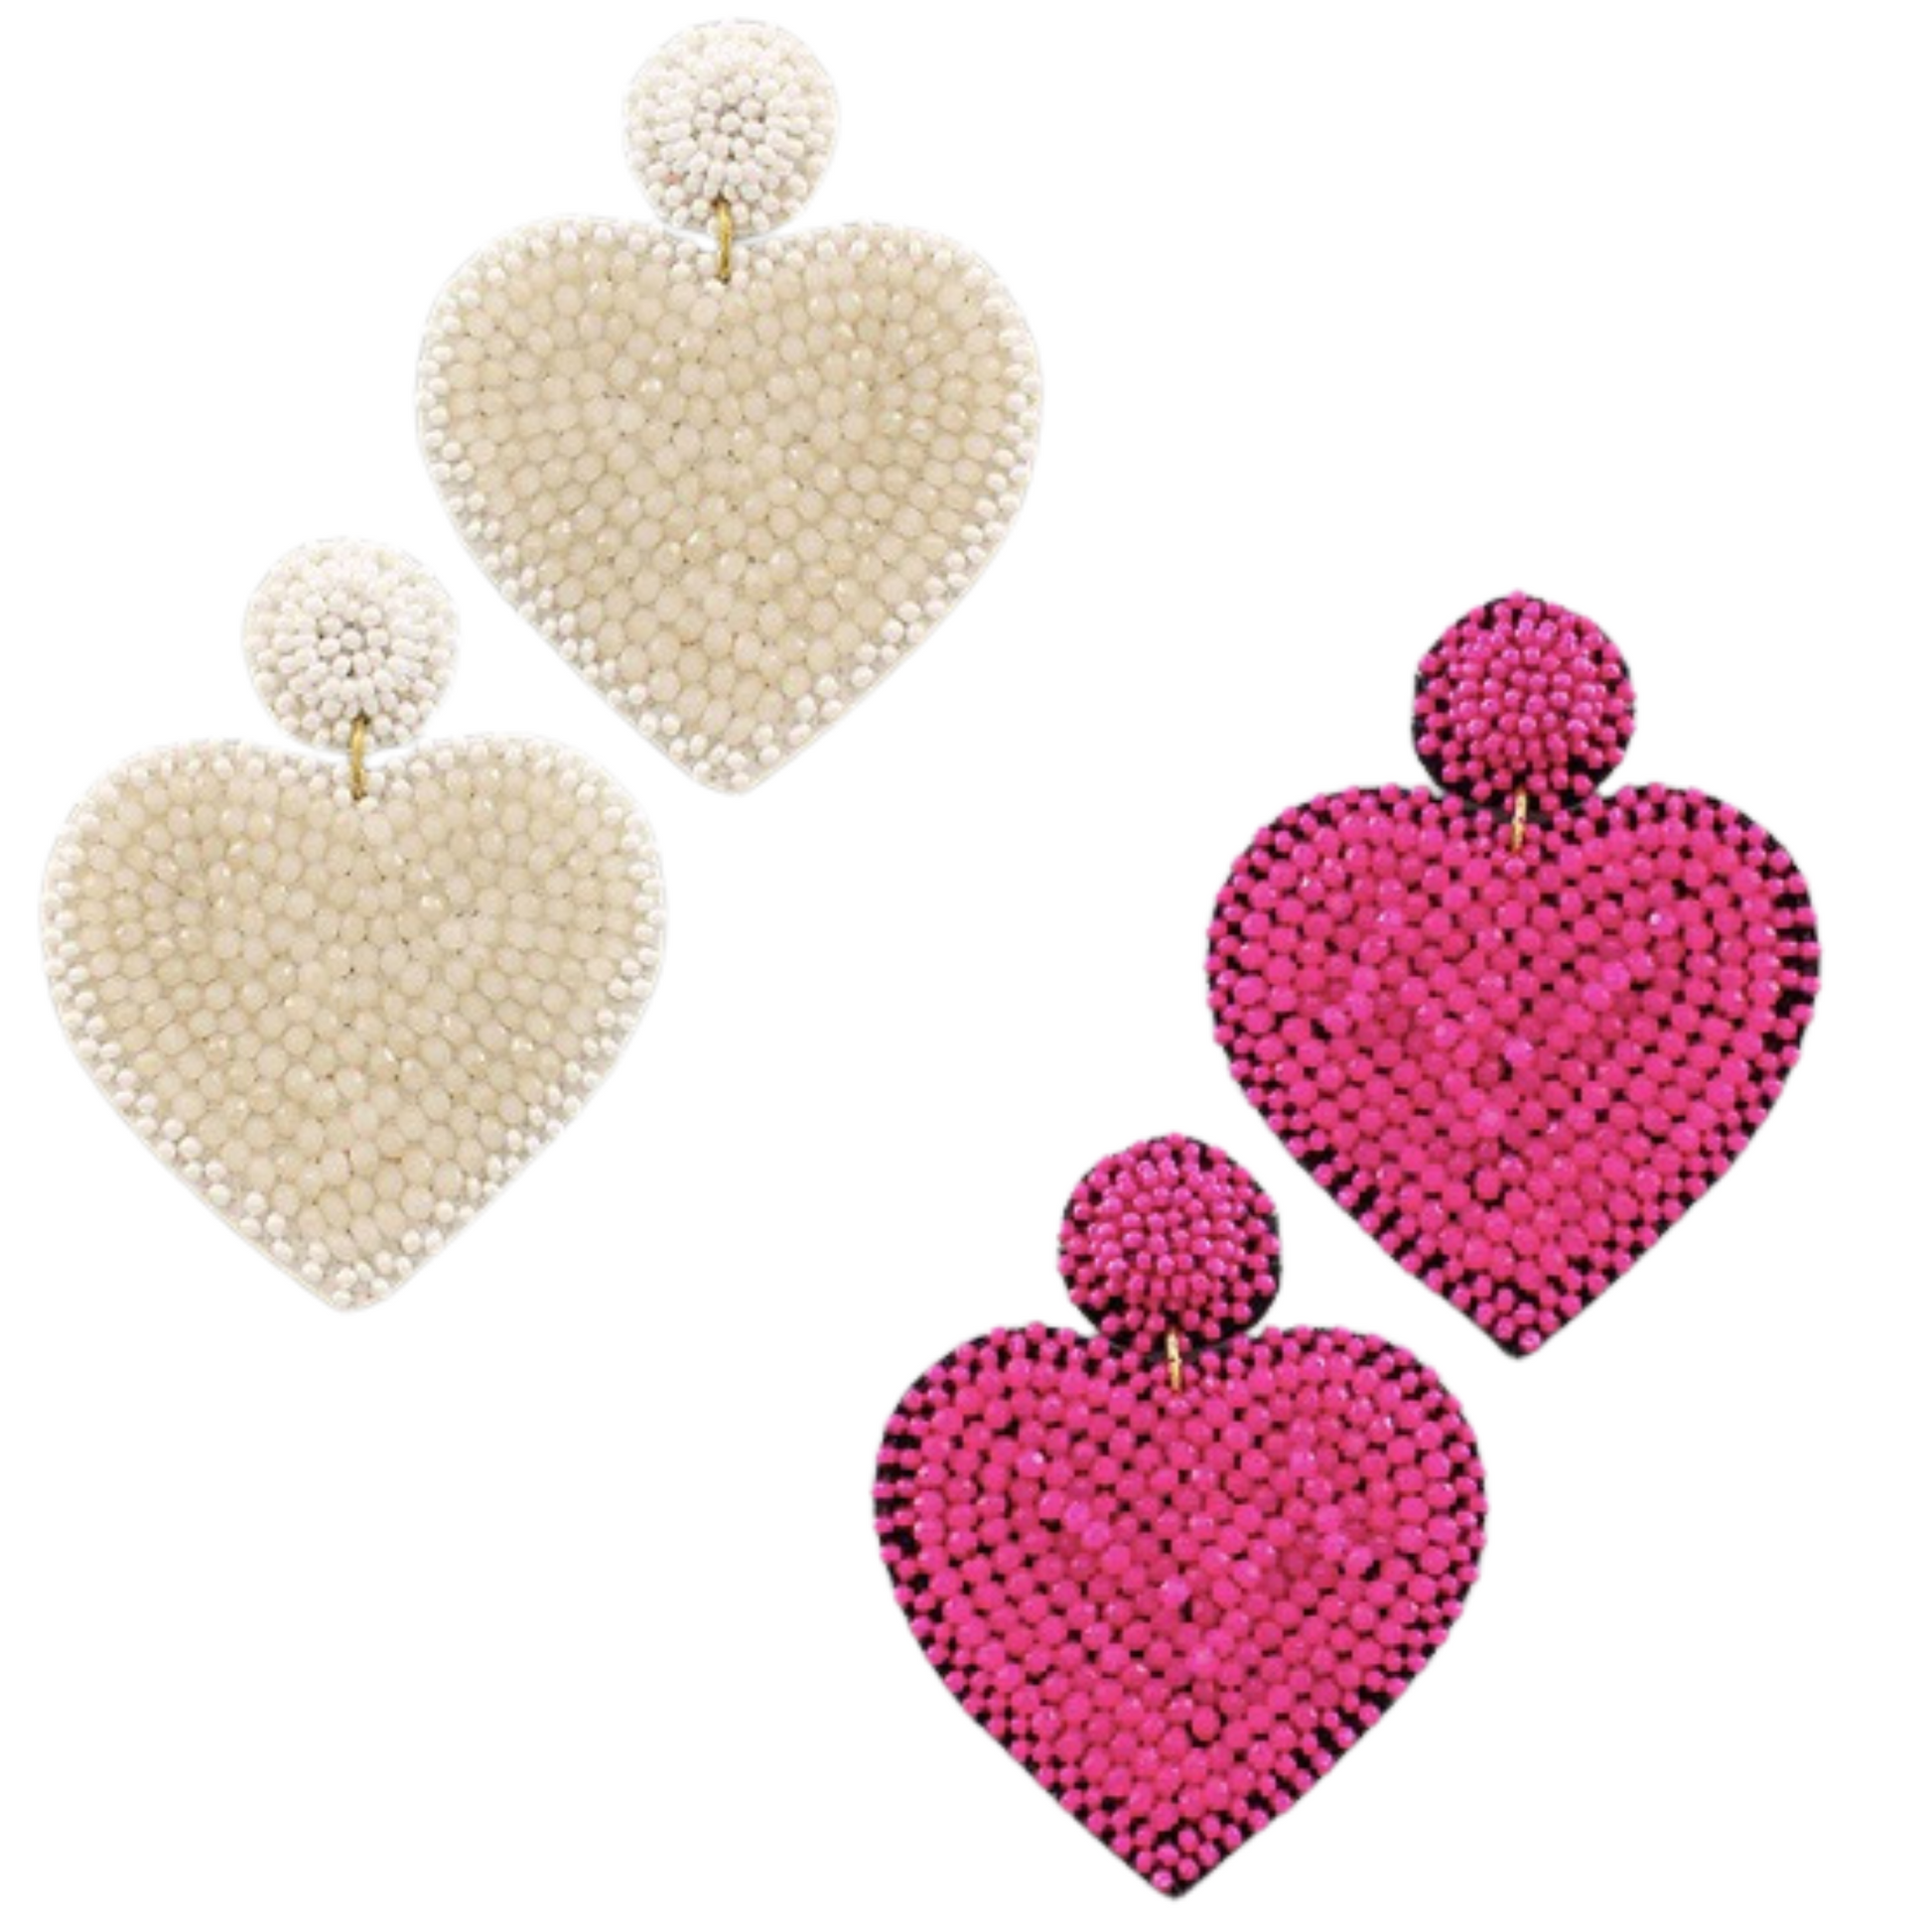 Add a touch of elegance to any outfit with our Heart Bead Earrings. Available in ivory or fuchsia, these beaded earrings are delicately crafted into a heart shape and dangle beautifully, making them a perfect addition to your jewelry collection.